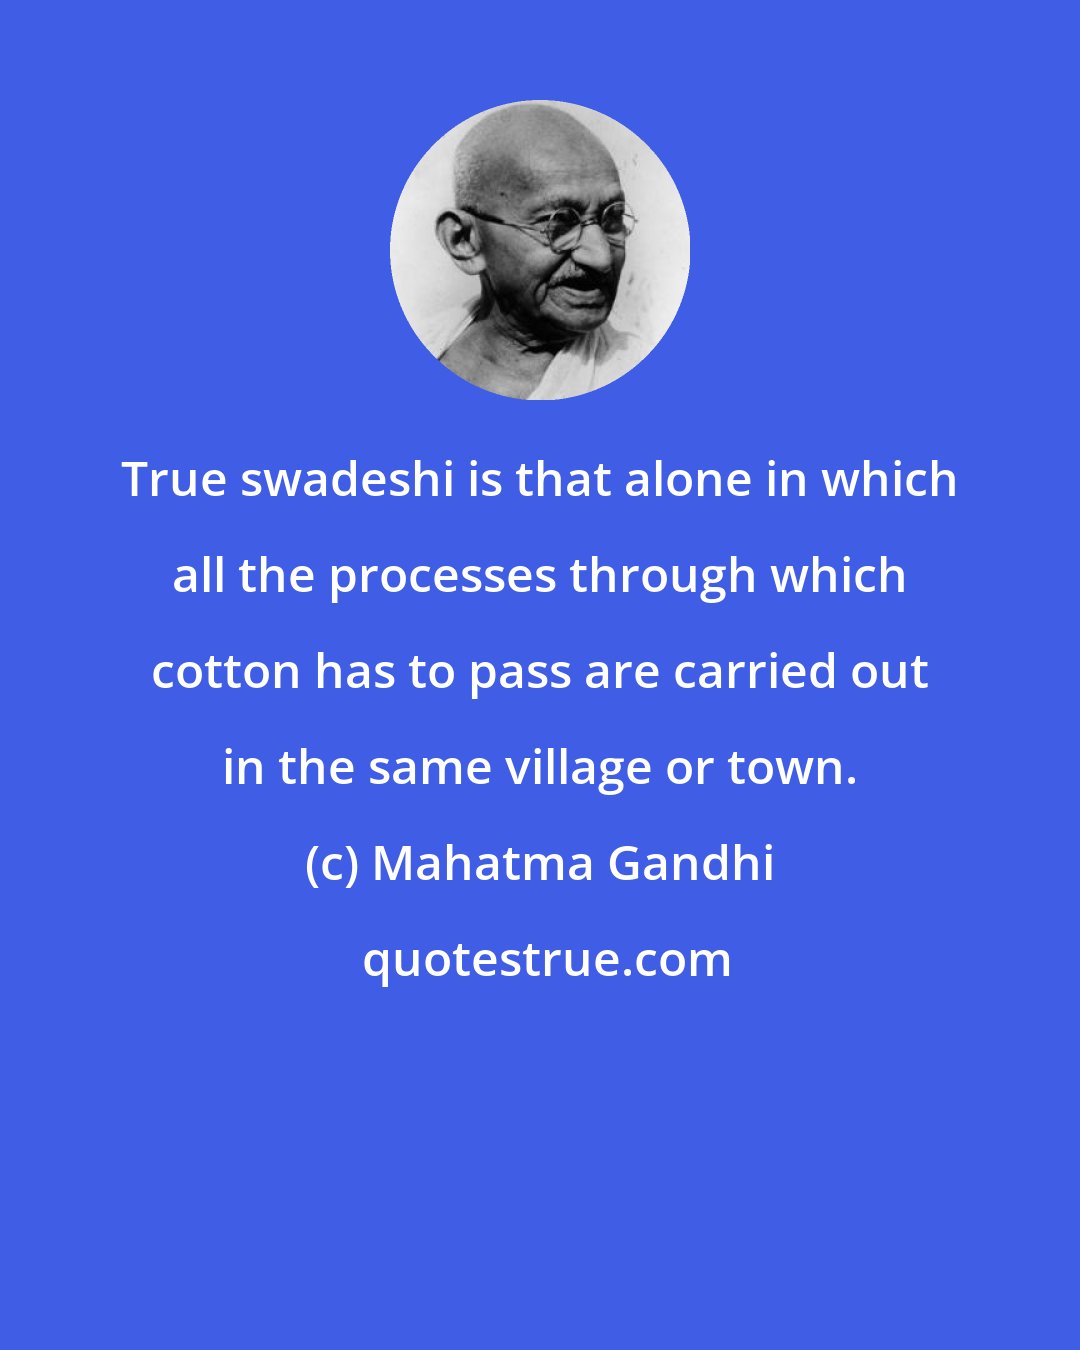 Mahatma Gandhi: True swadeshi is that alone in which all the processes through which cotton has to pass are carried out in the same village or town.